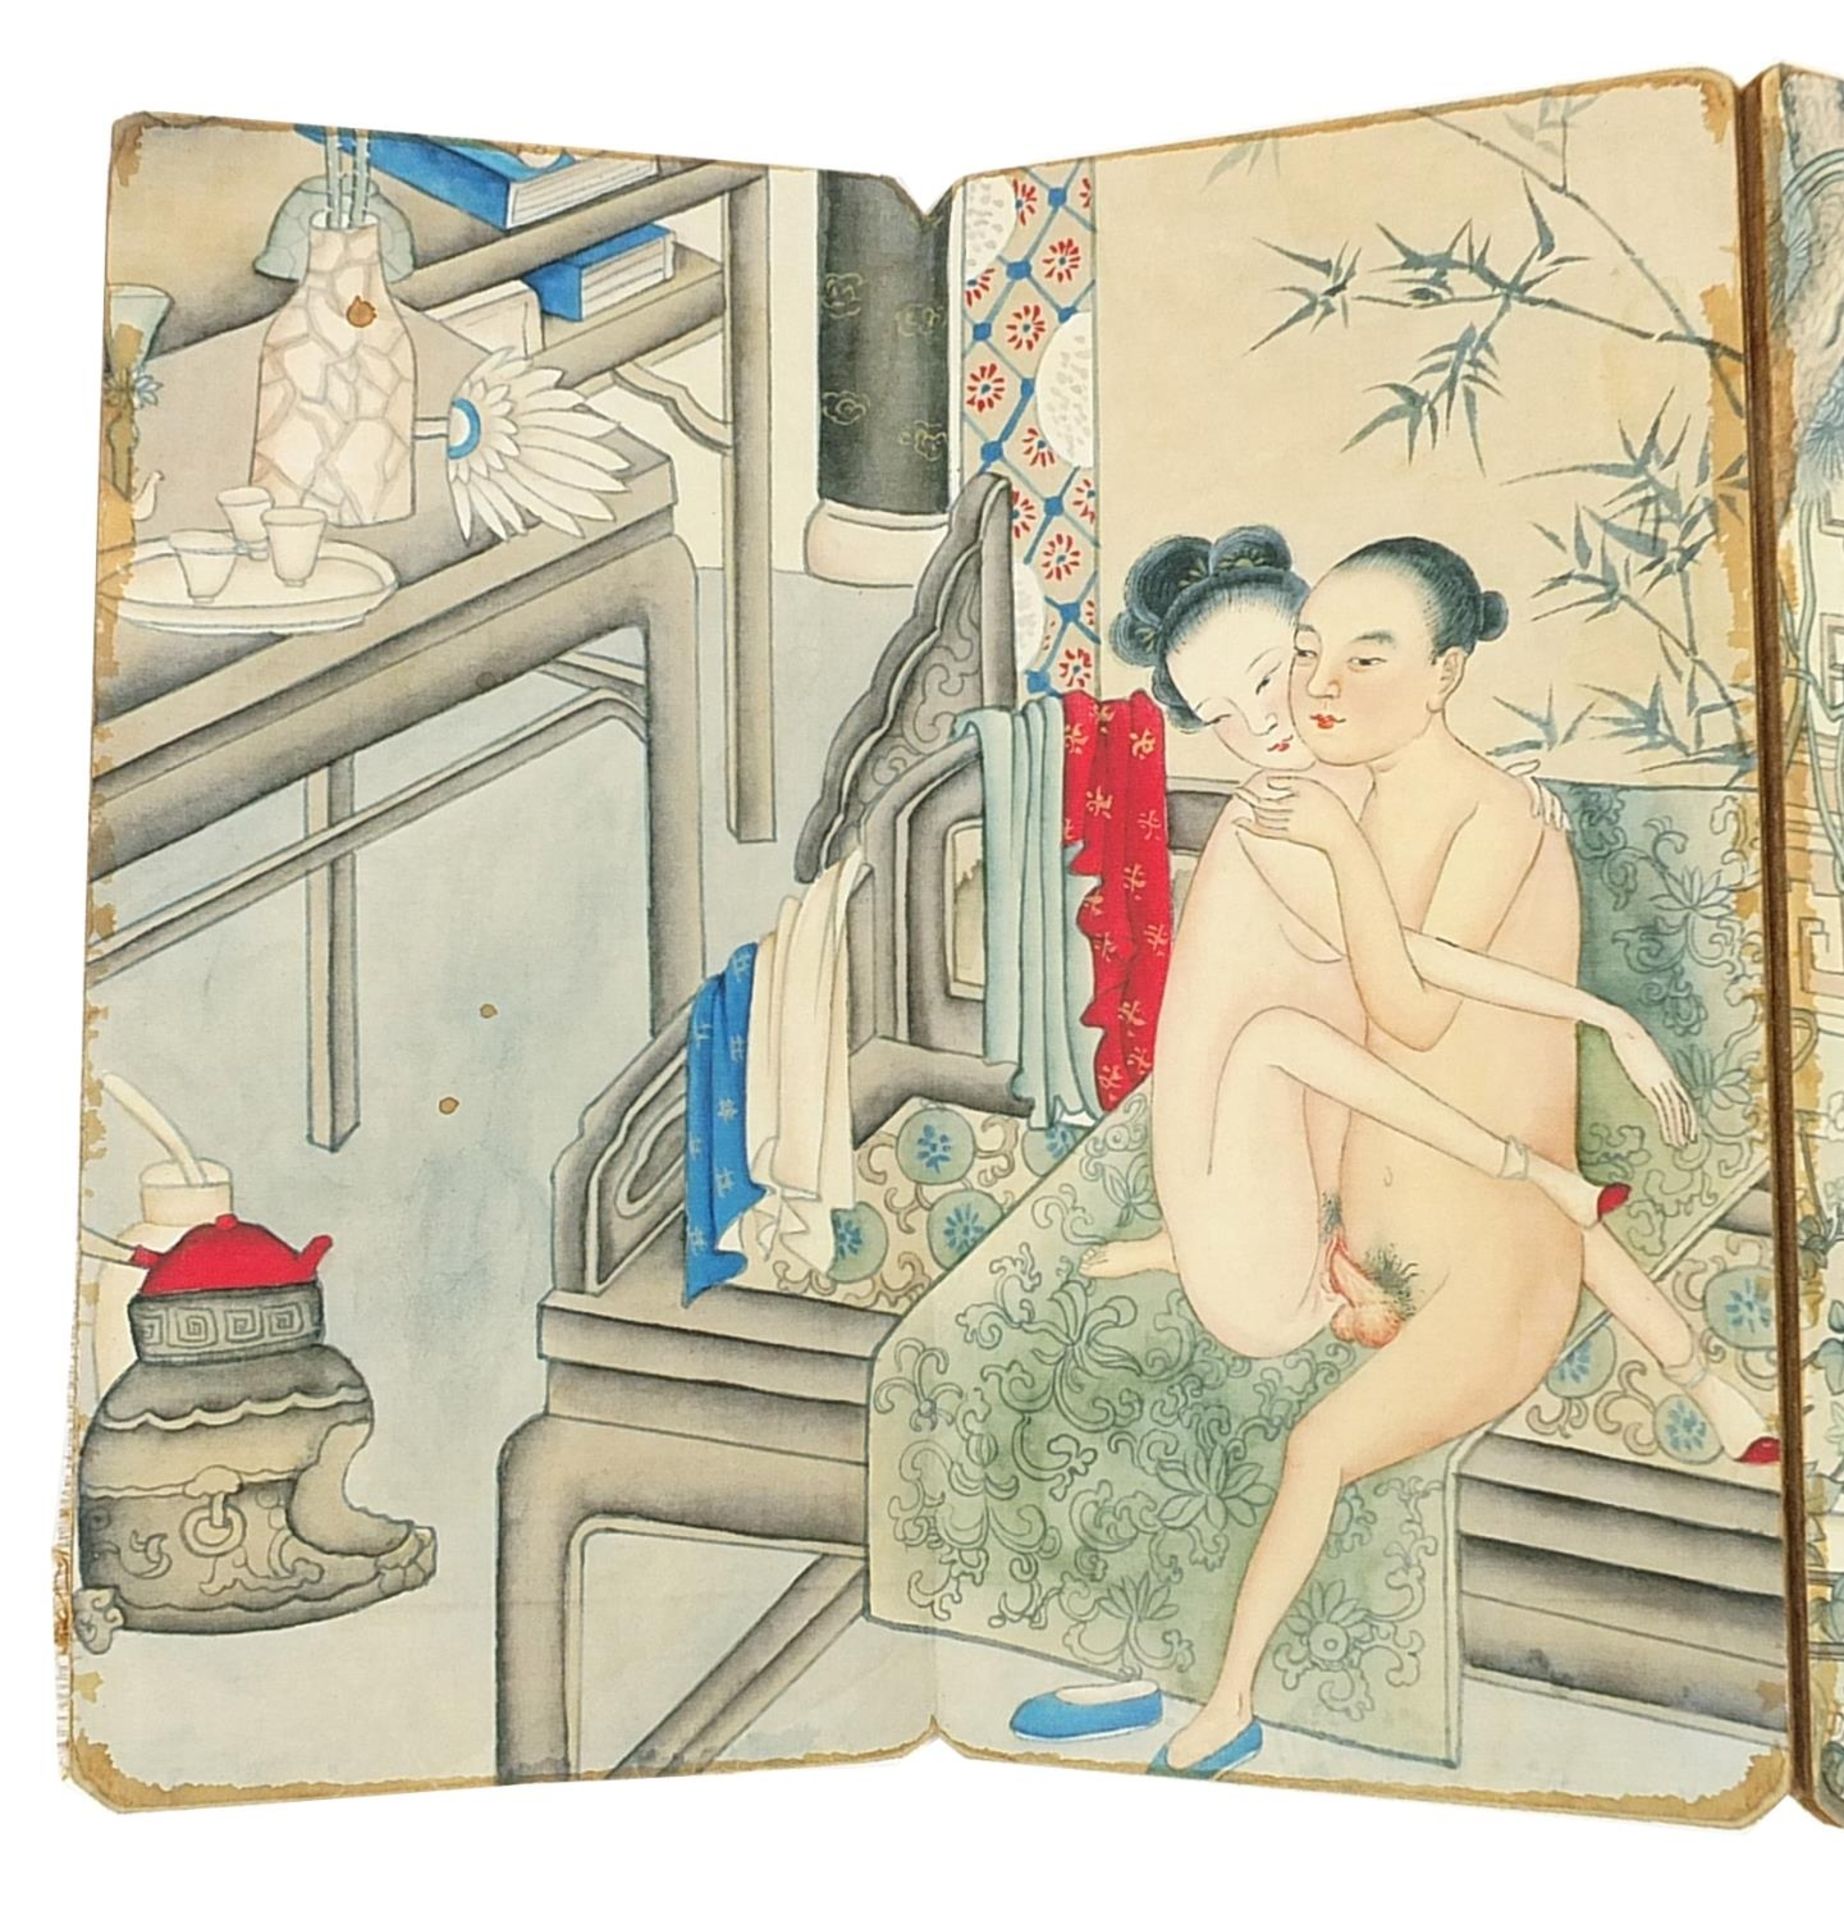 Chinese folding book depicting erotic scenes - Image 2 of 8